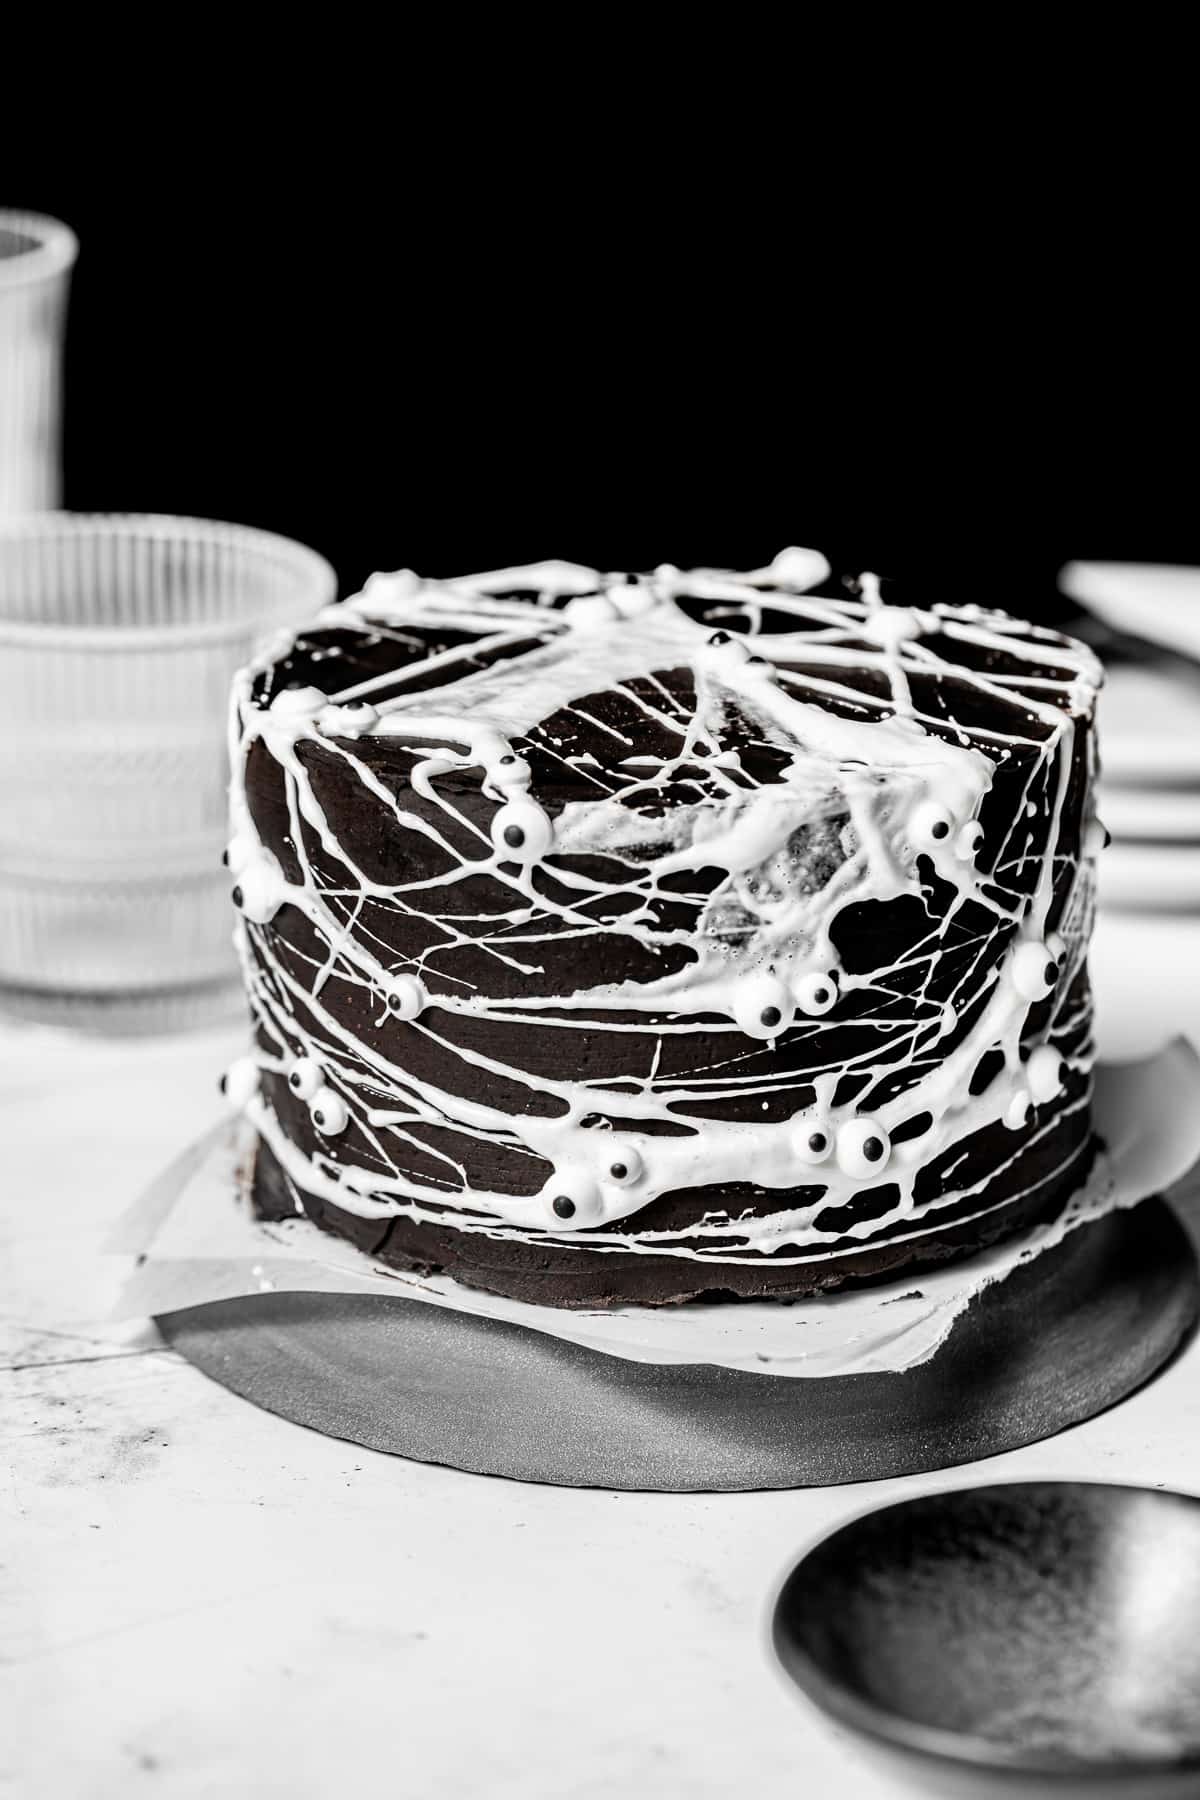 spider web cake on plate.